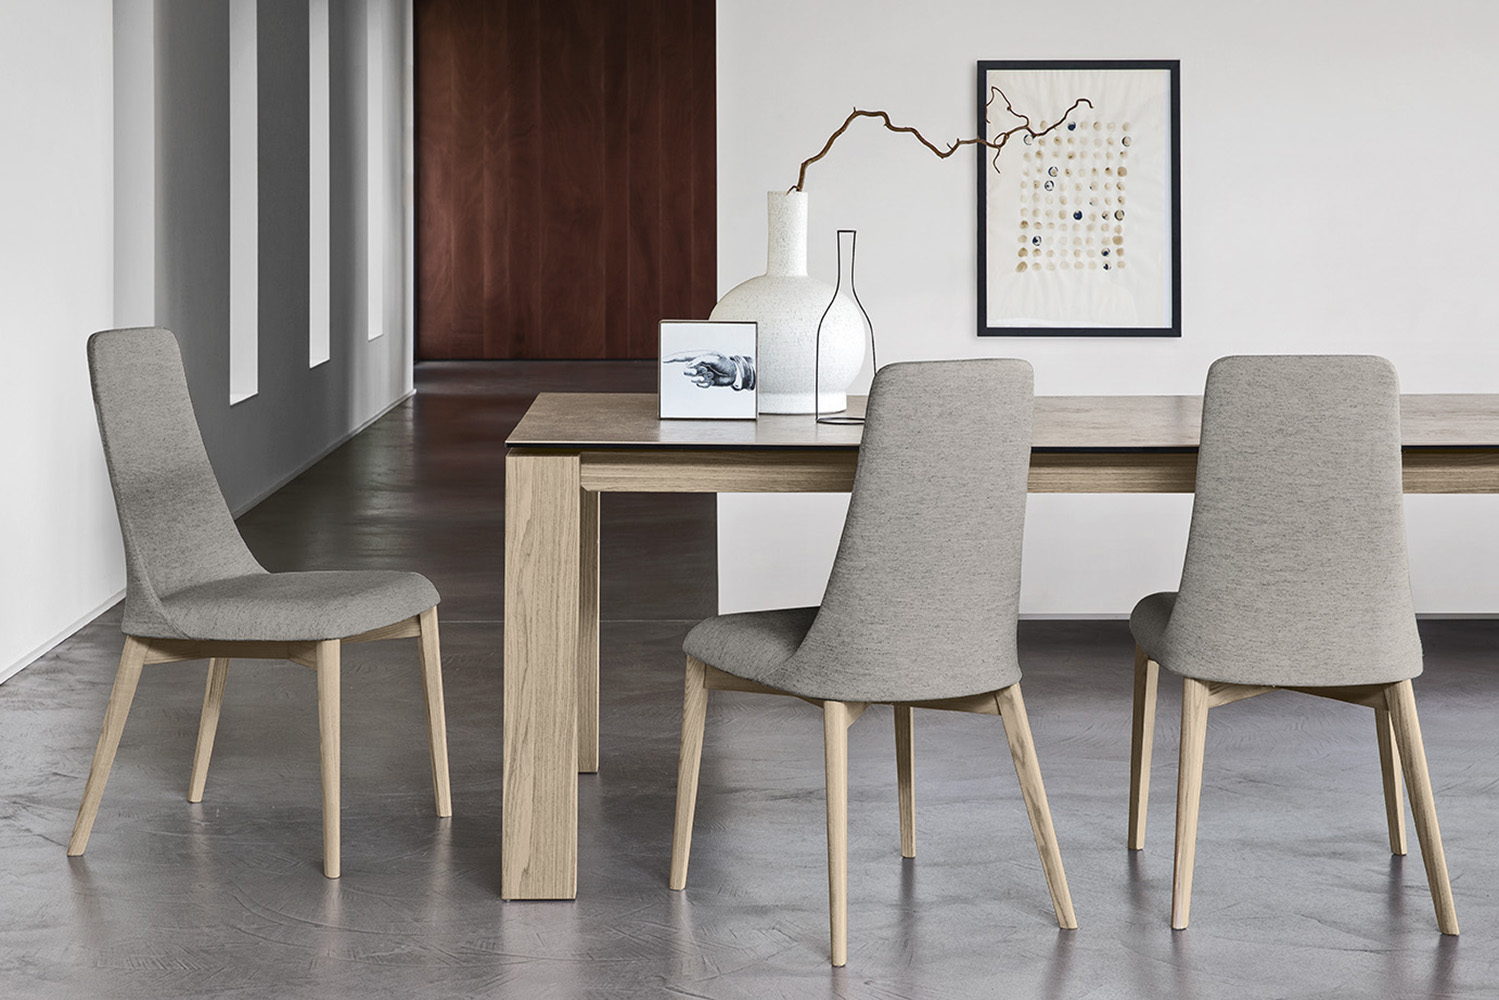 Omnia Table with extendable rectangular top and wooden legs Large • Seats  8-10 CS4058-R 180